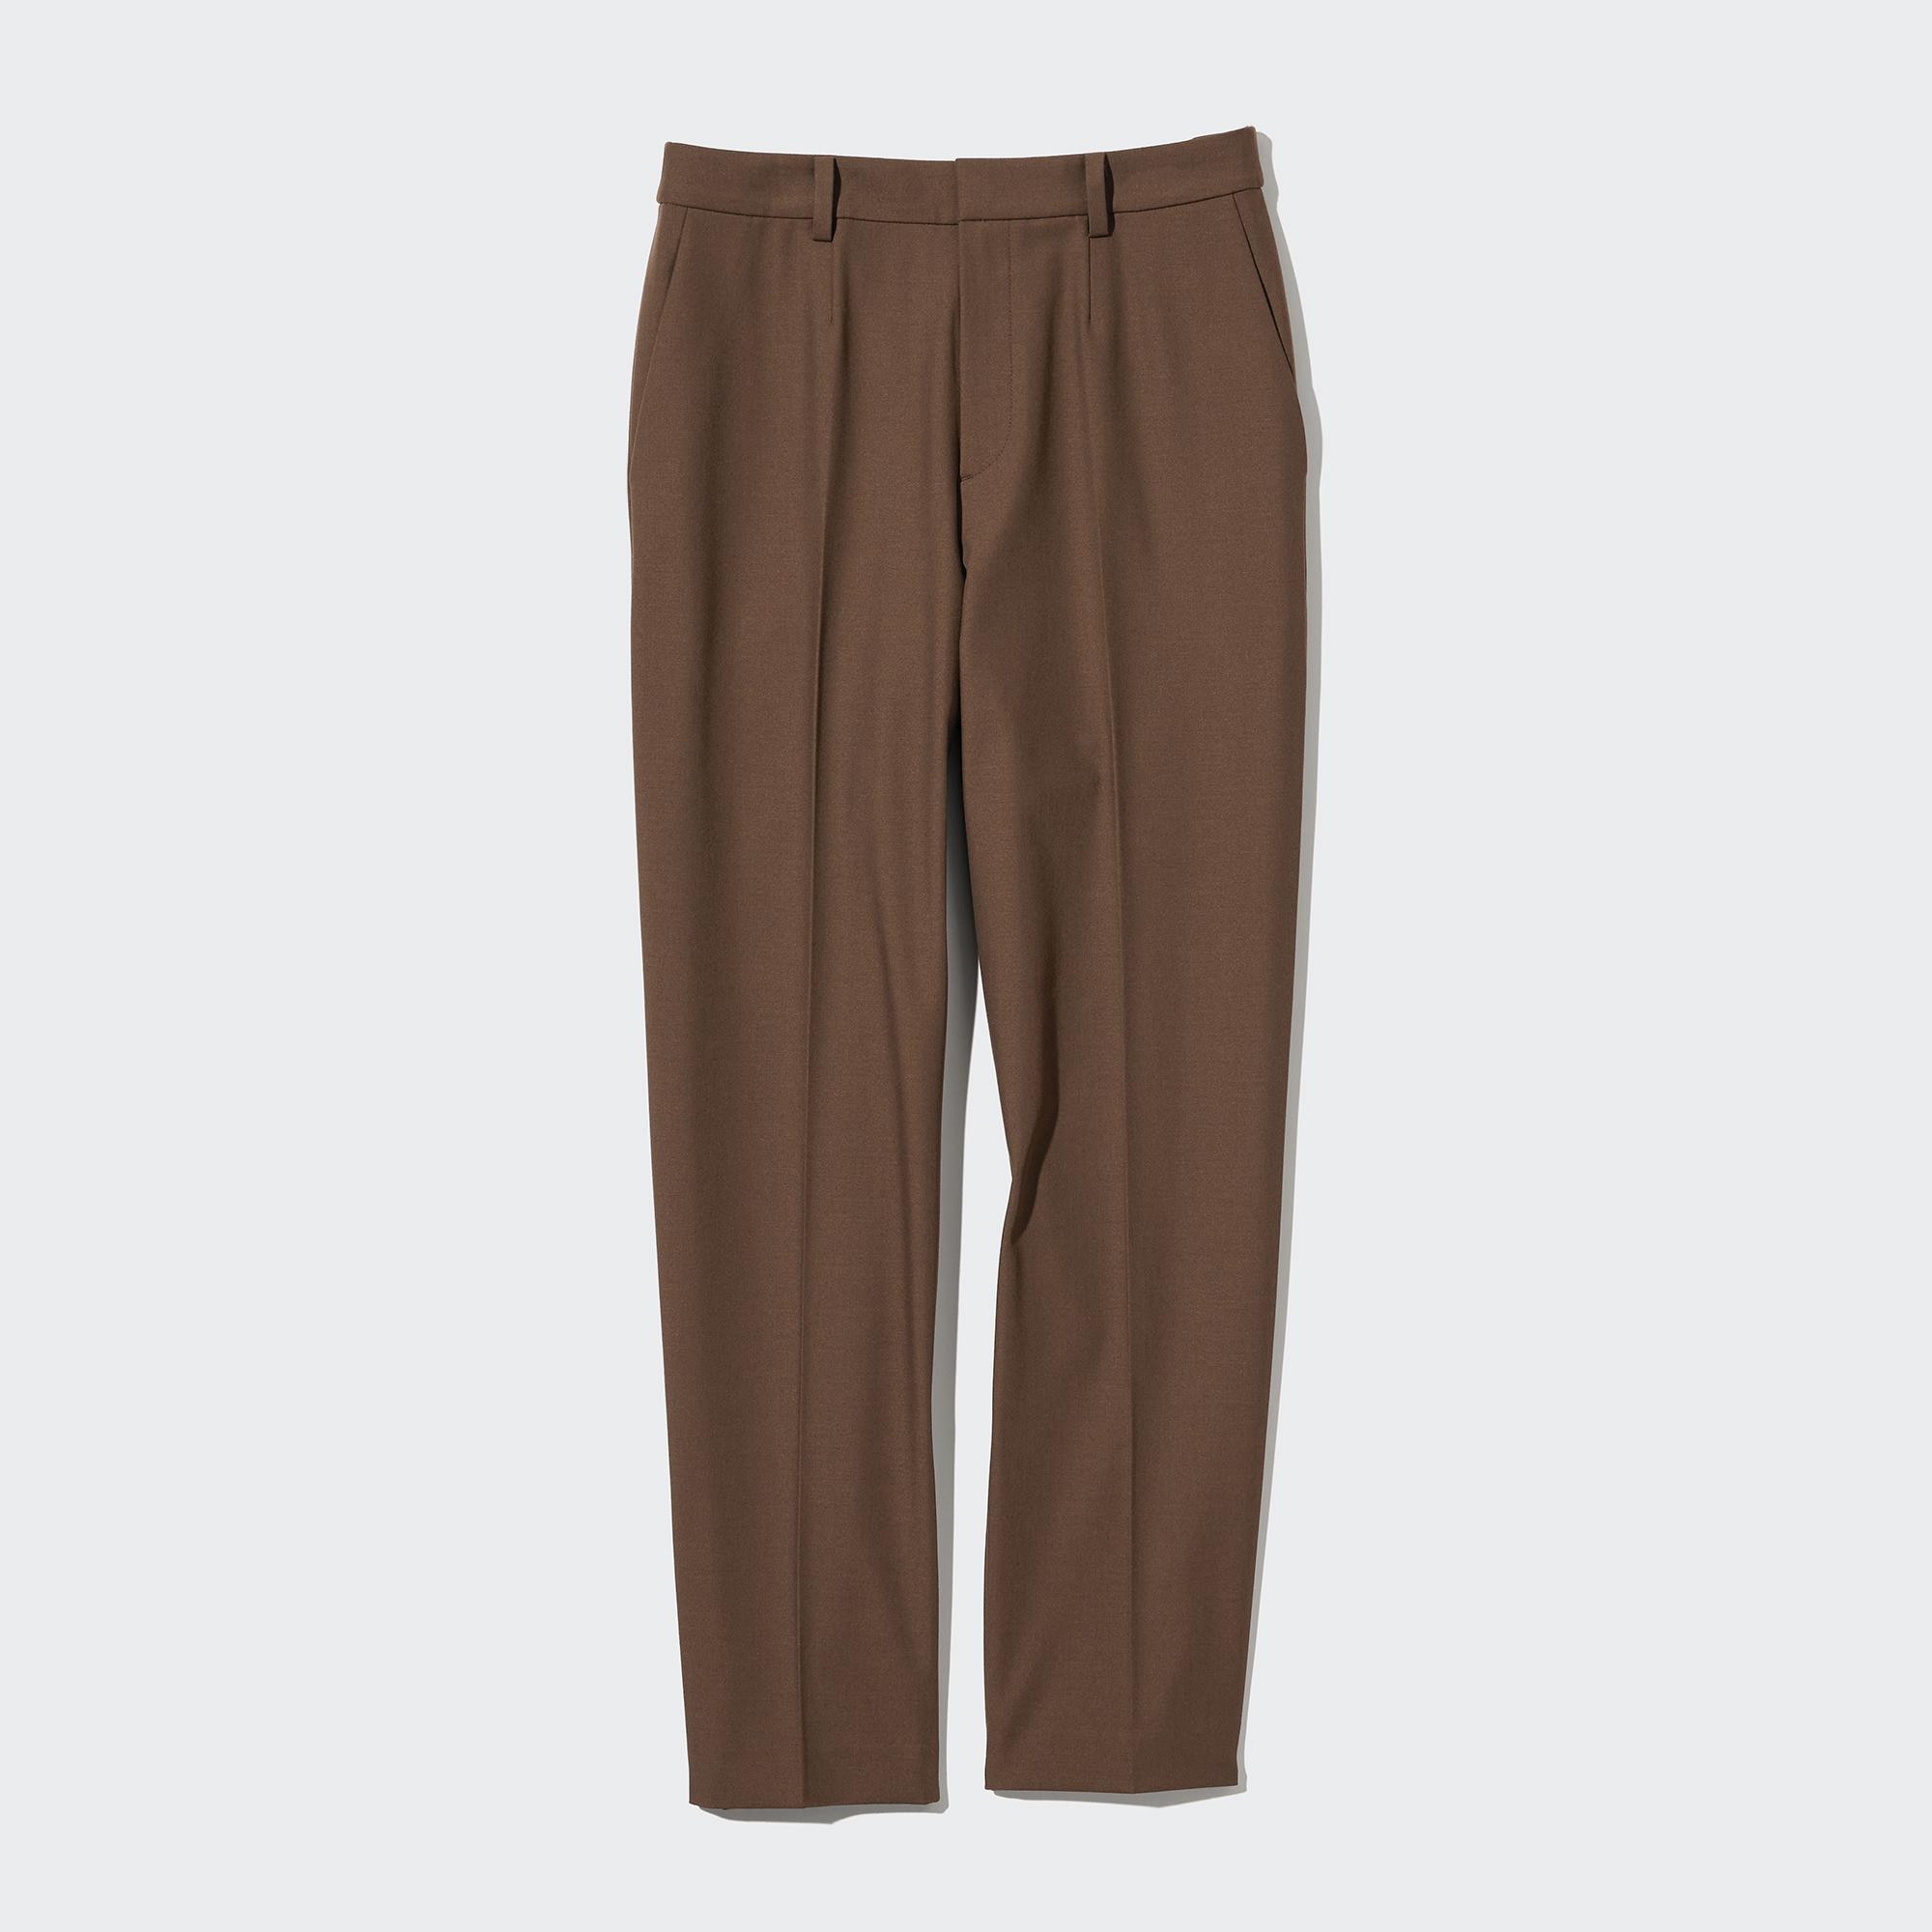 2 Way Stretch Elasticated Trousers